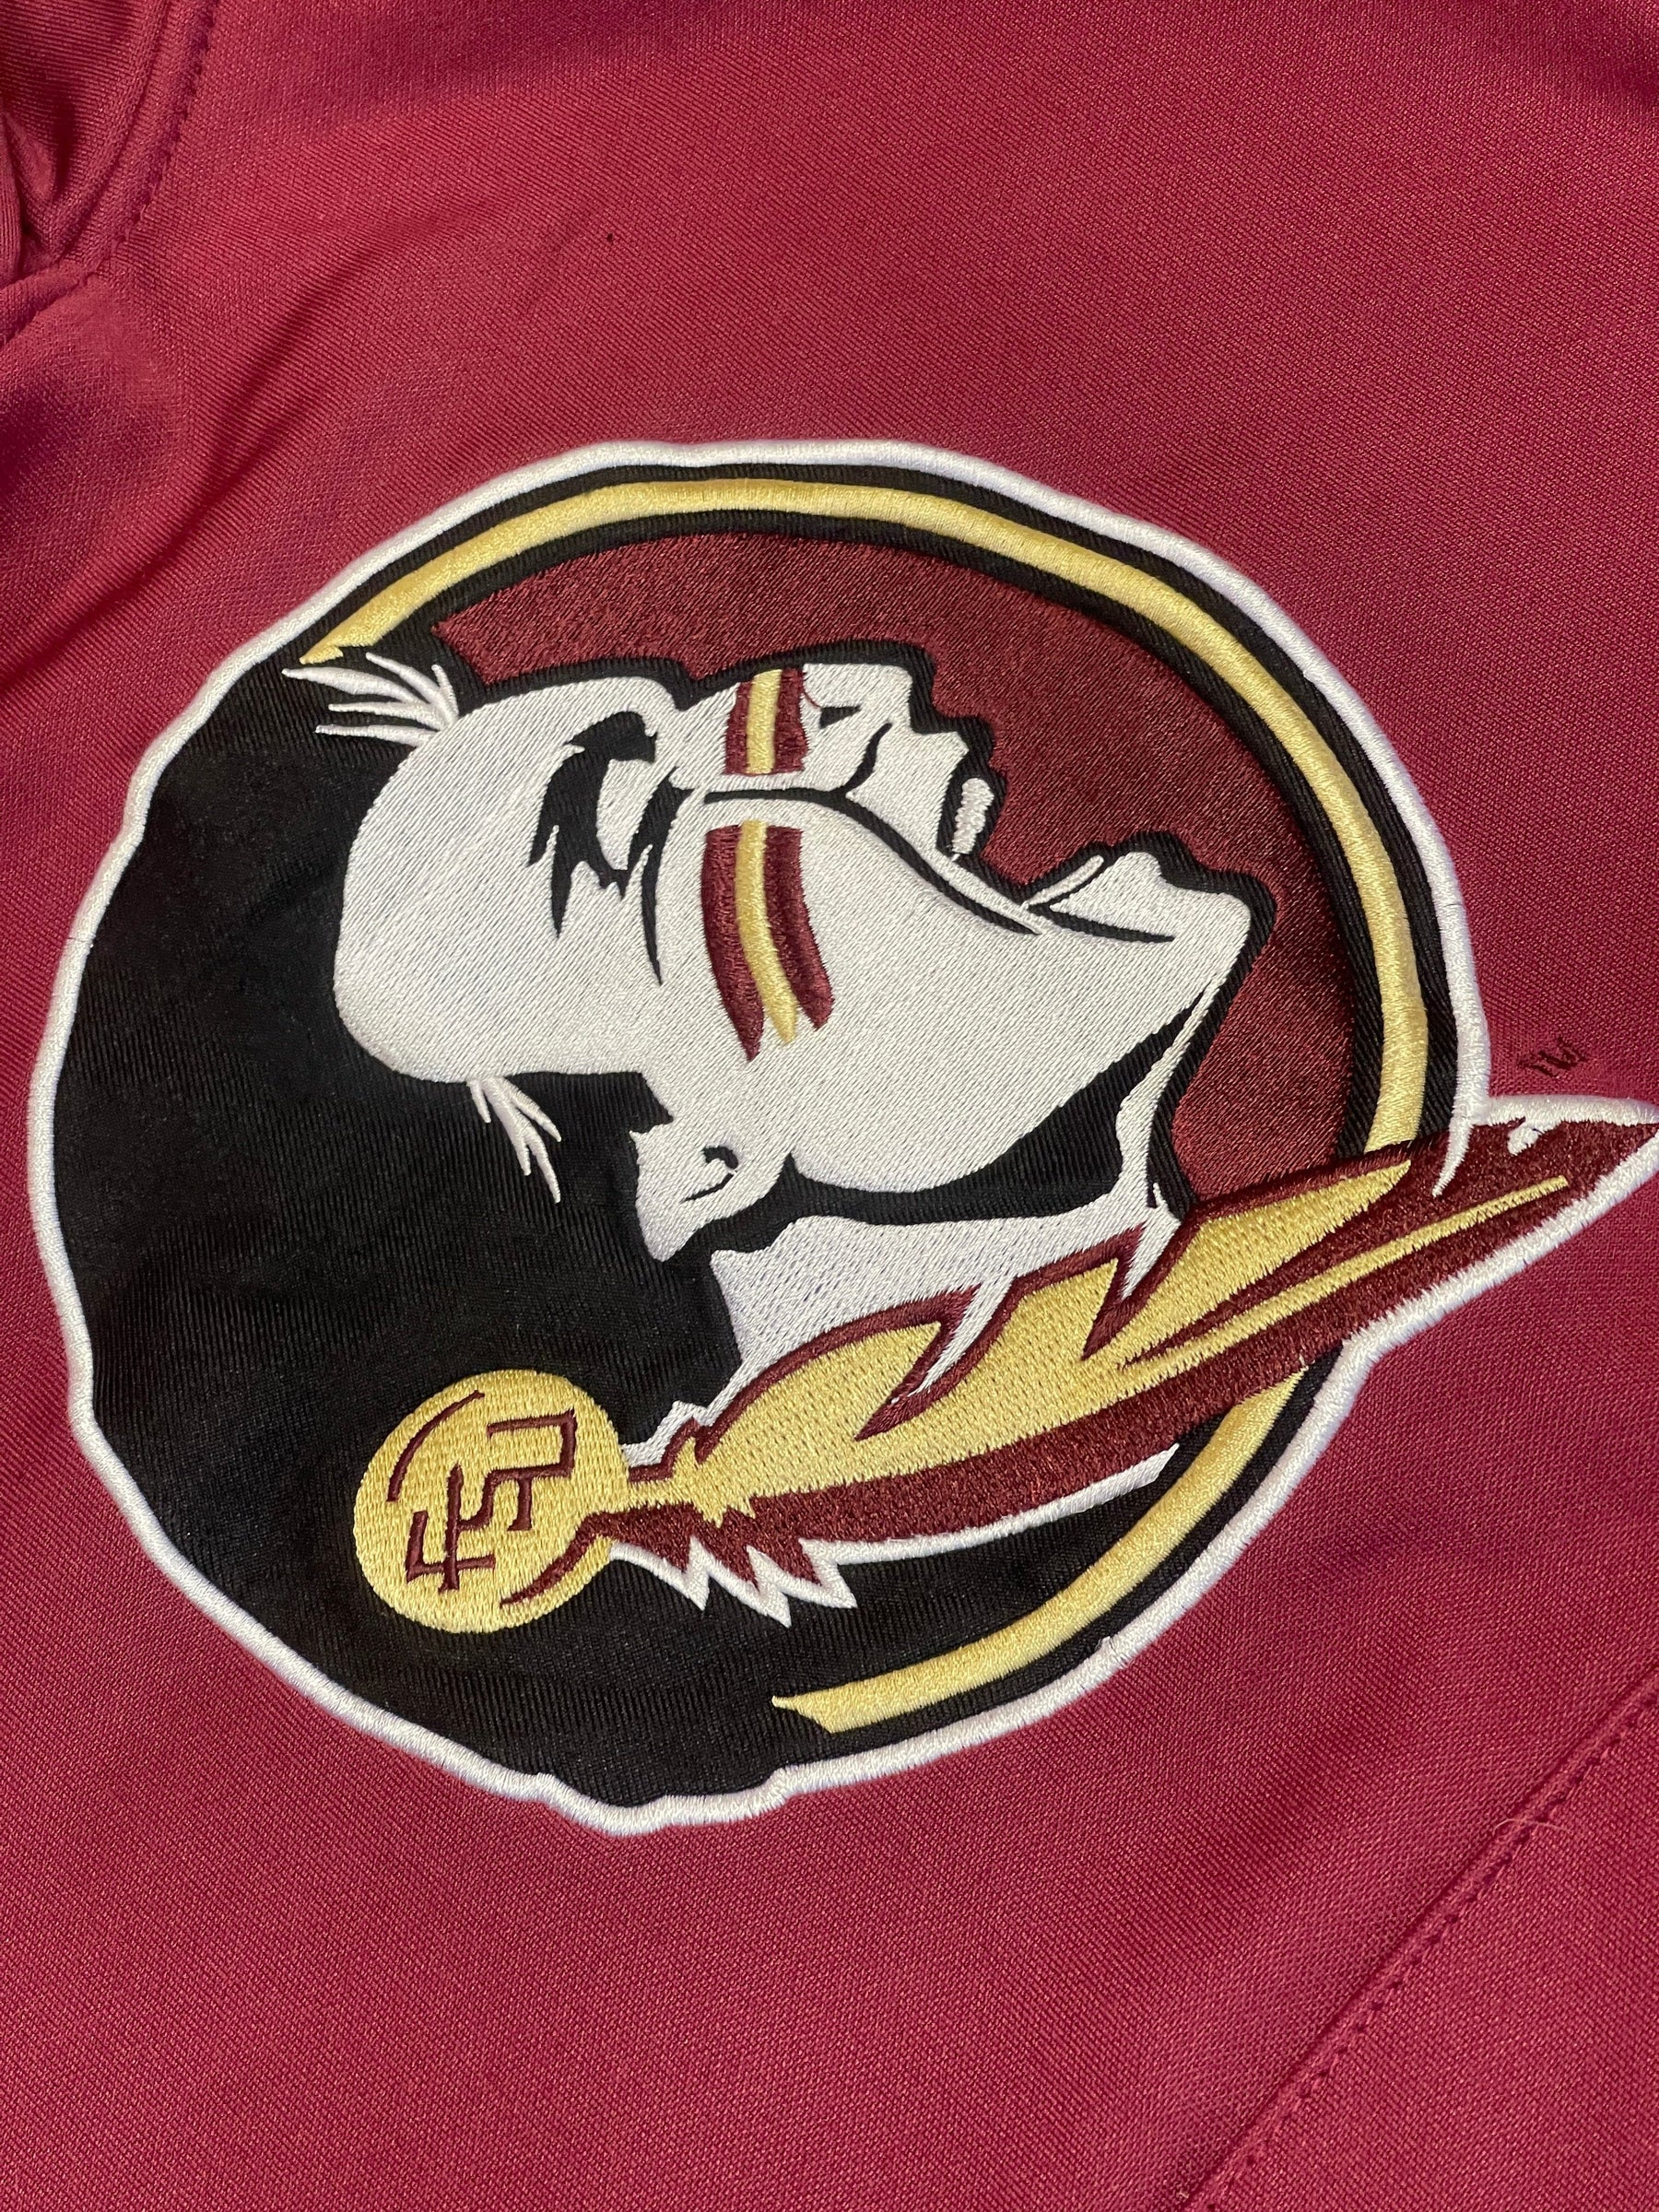 NCAA Florida State Seminoles Colosseum Stitched Pullover Hoodie Youth Small 8-10